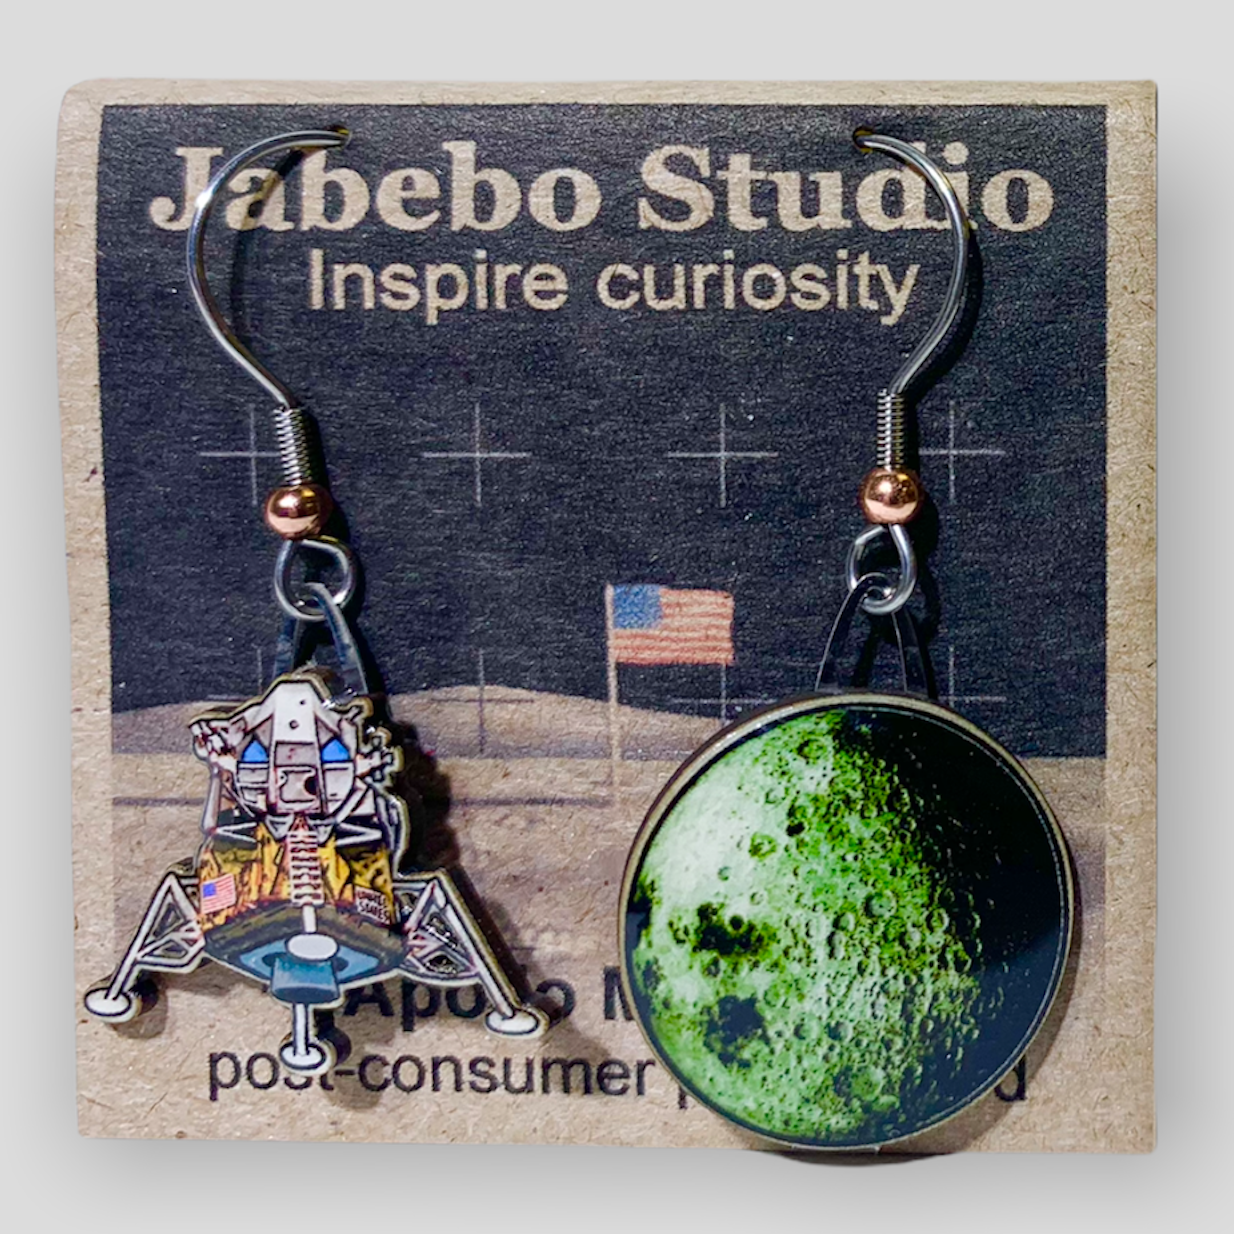 Picture shown is of 1 inch tall pair of earrings of the Apollo Mission.